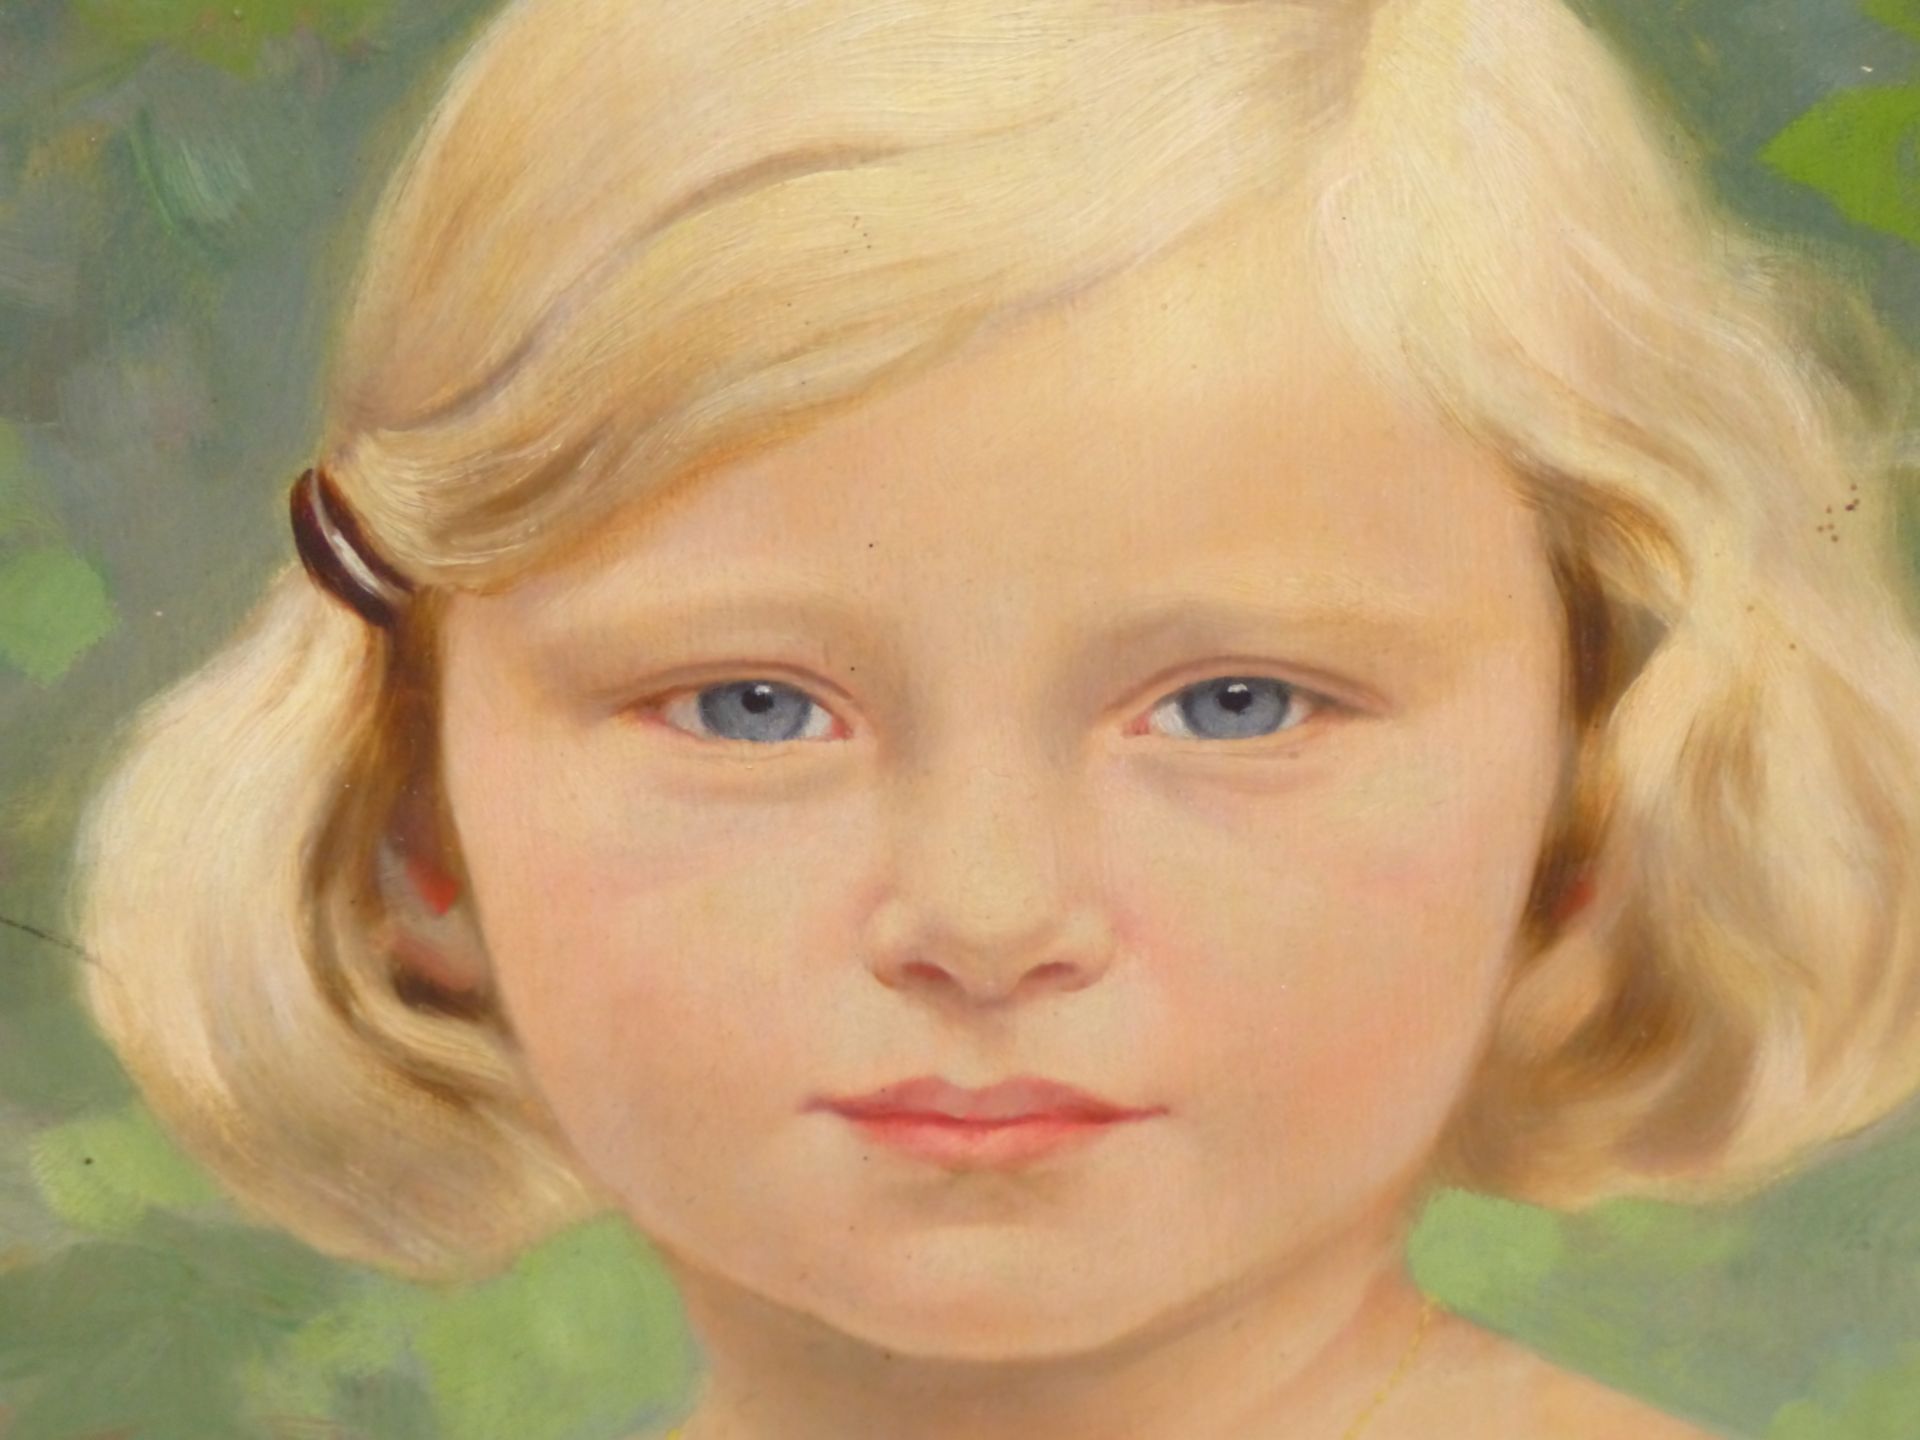 M. SPILHACZEK (1876-1961) ARR. PORTRAIT OF A YOUNG GIRL, SIGNED AND DATED 1930, OIL ON BOARD. 49 x - Image 6 of 8